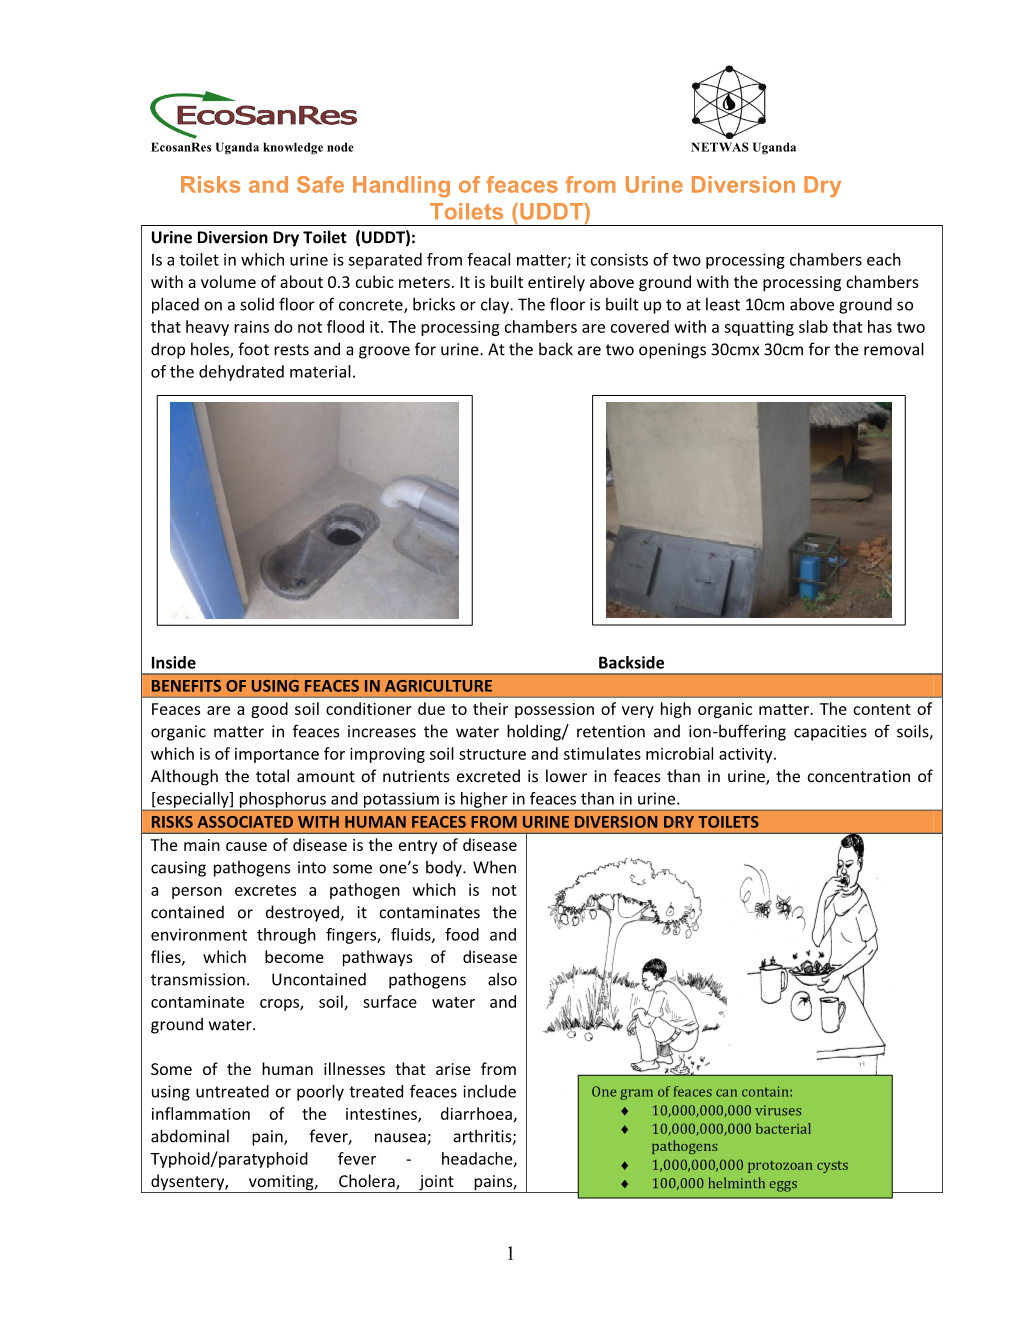 Risks and Safe Handling of Feaces from Urine Diversion Dry Toilets (UDDT)